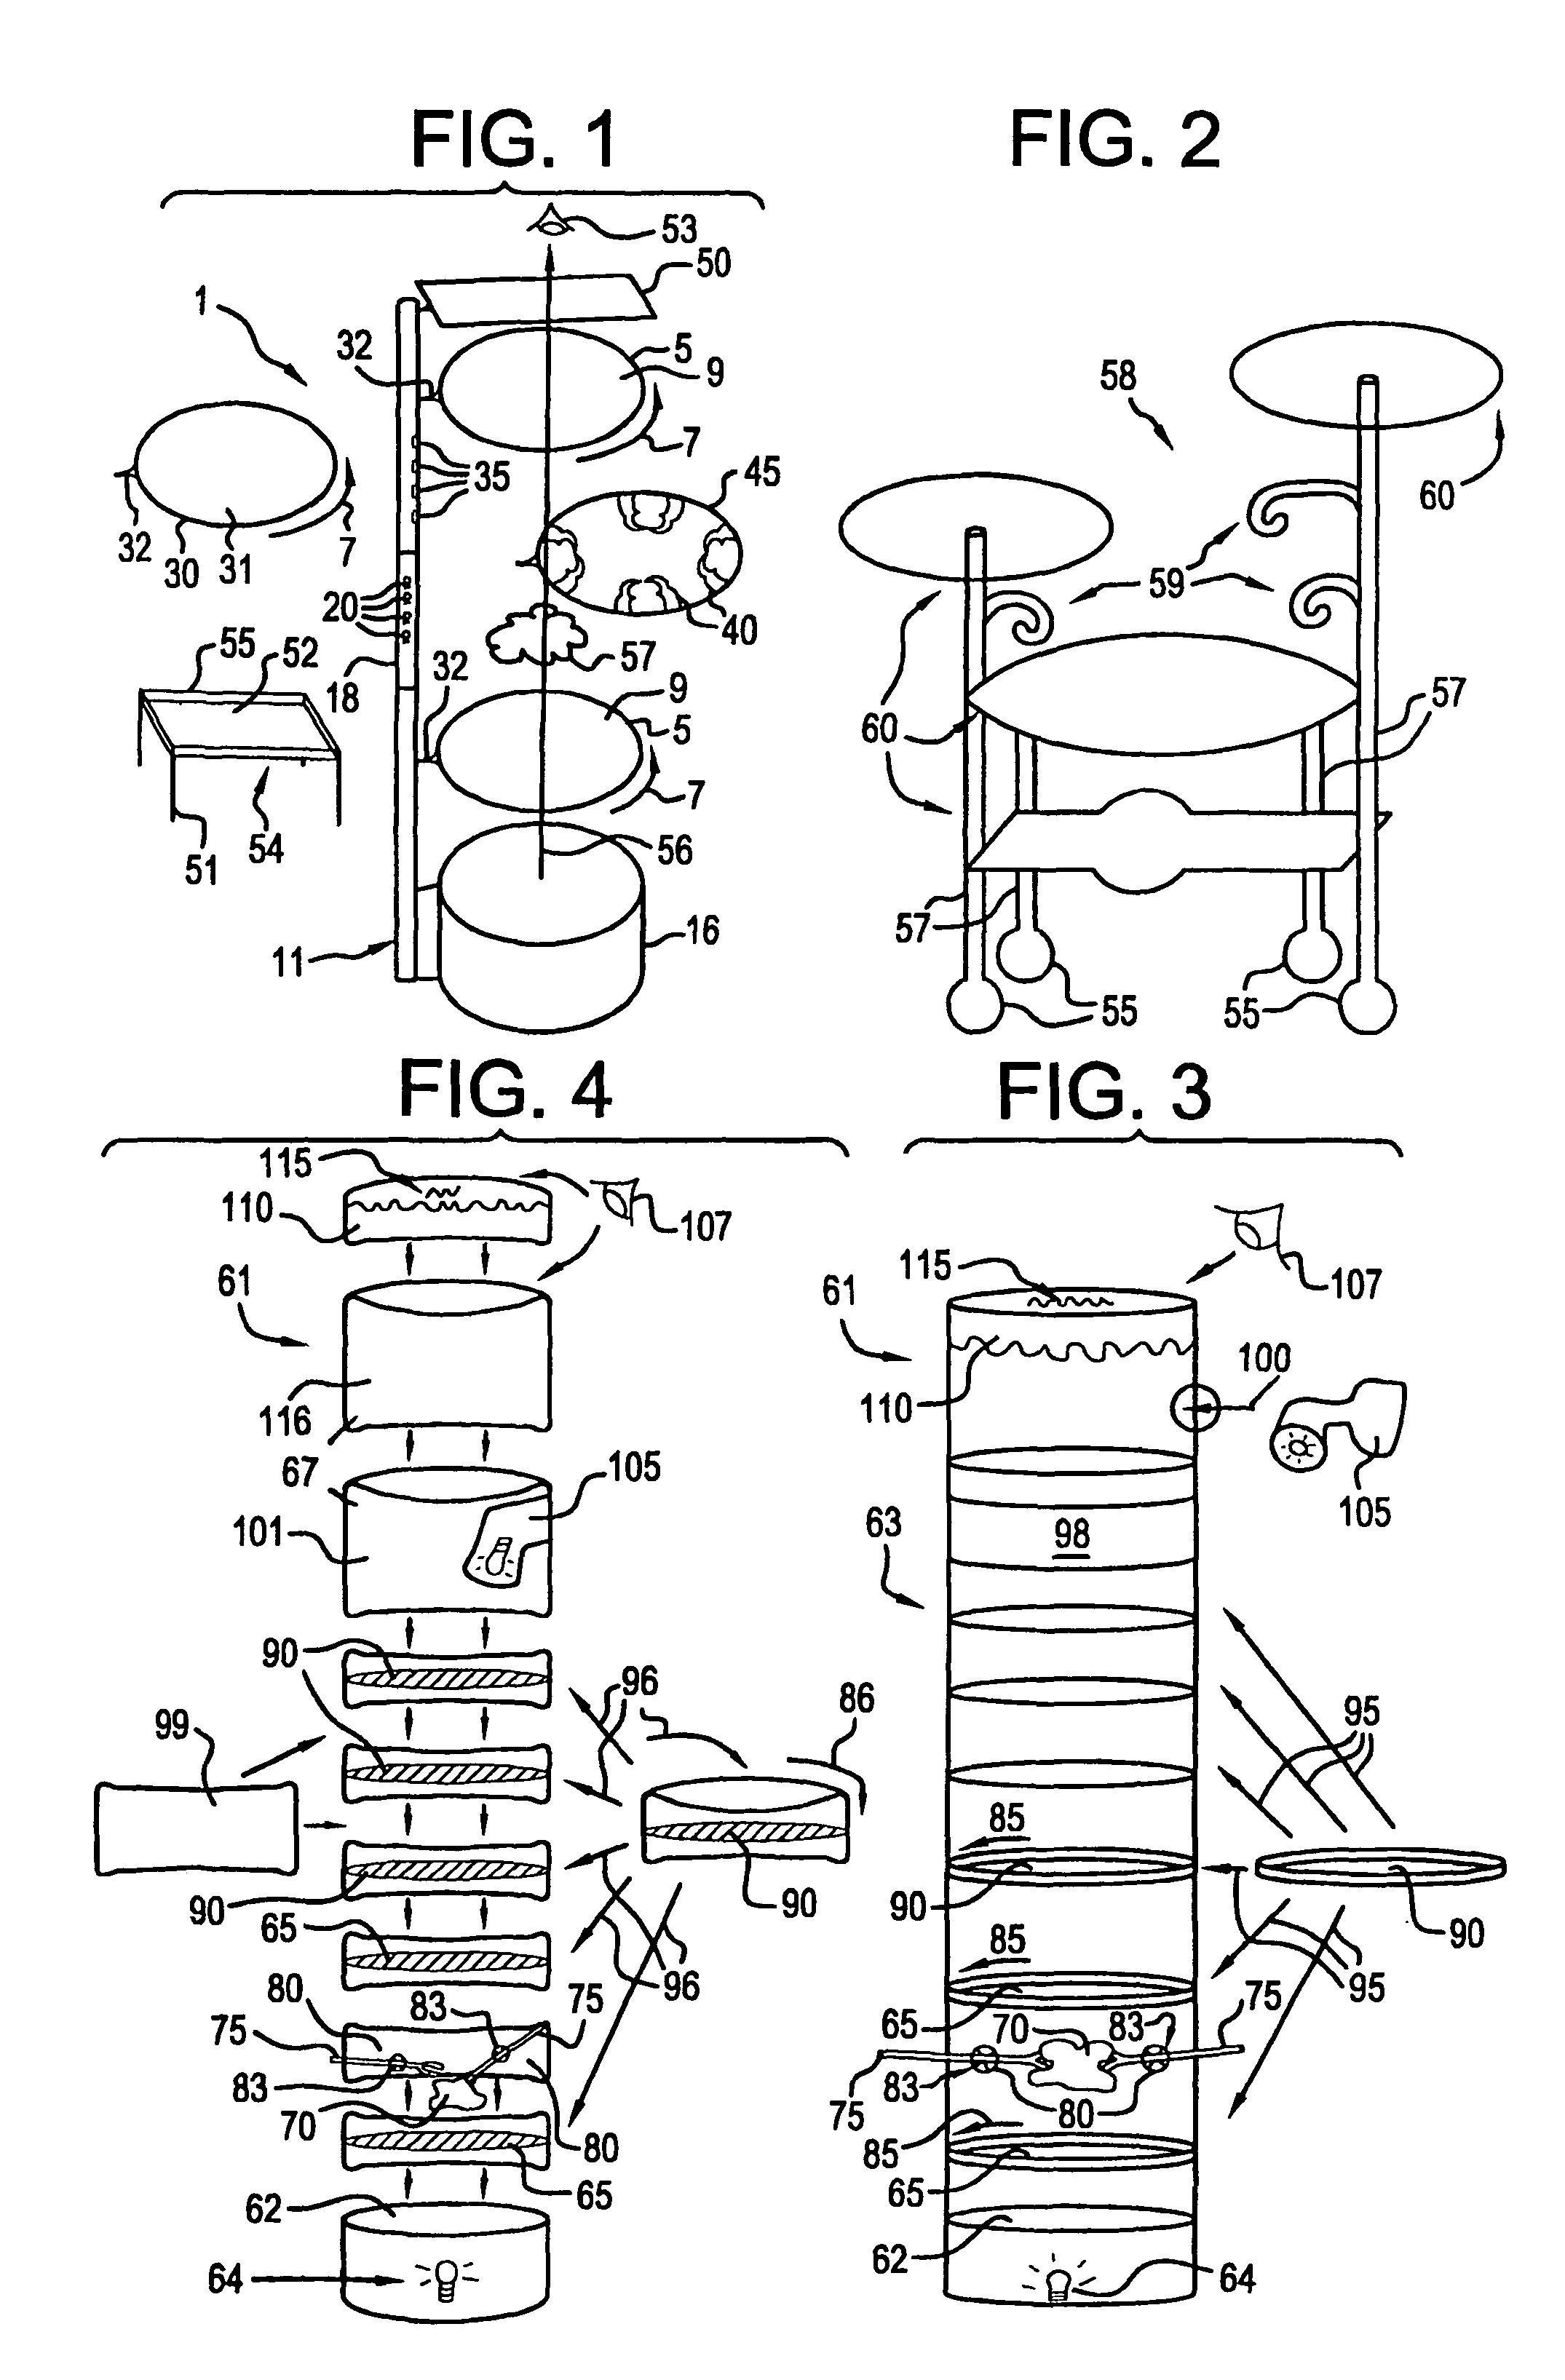 Polariscope toy and ornament with accompanying photoelastic and/or photoplastic devices